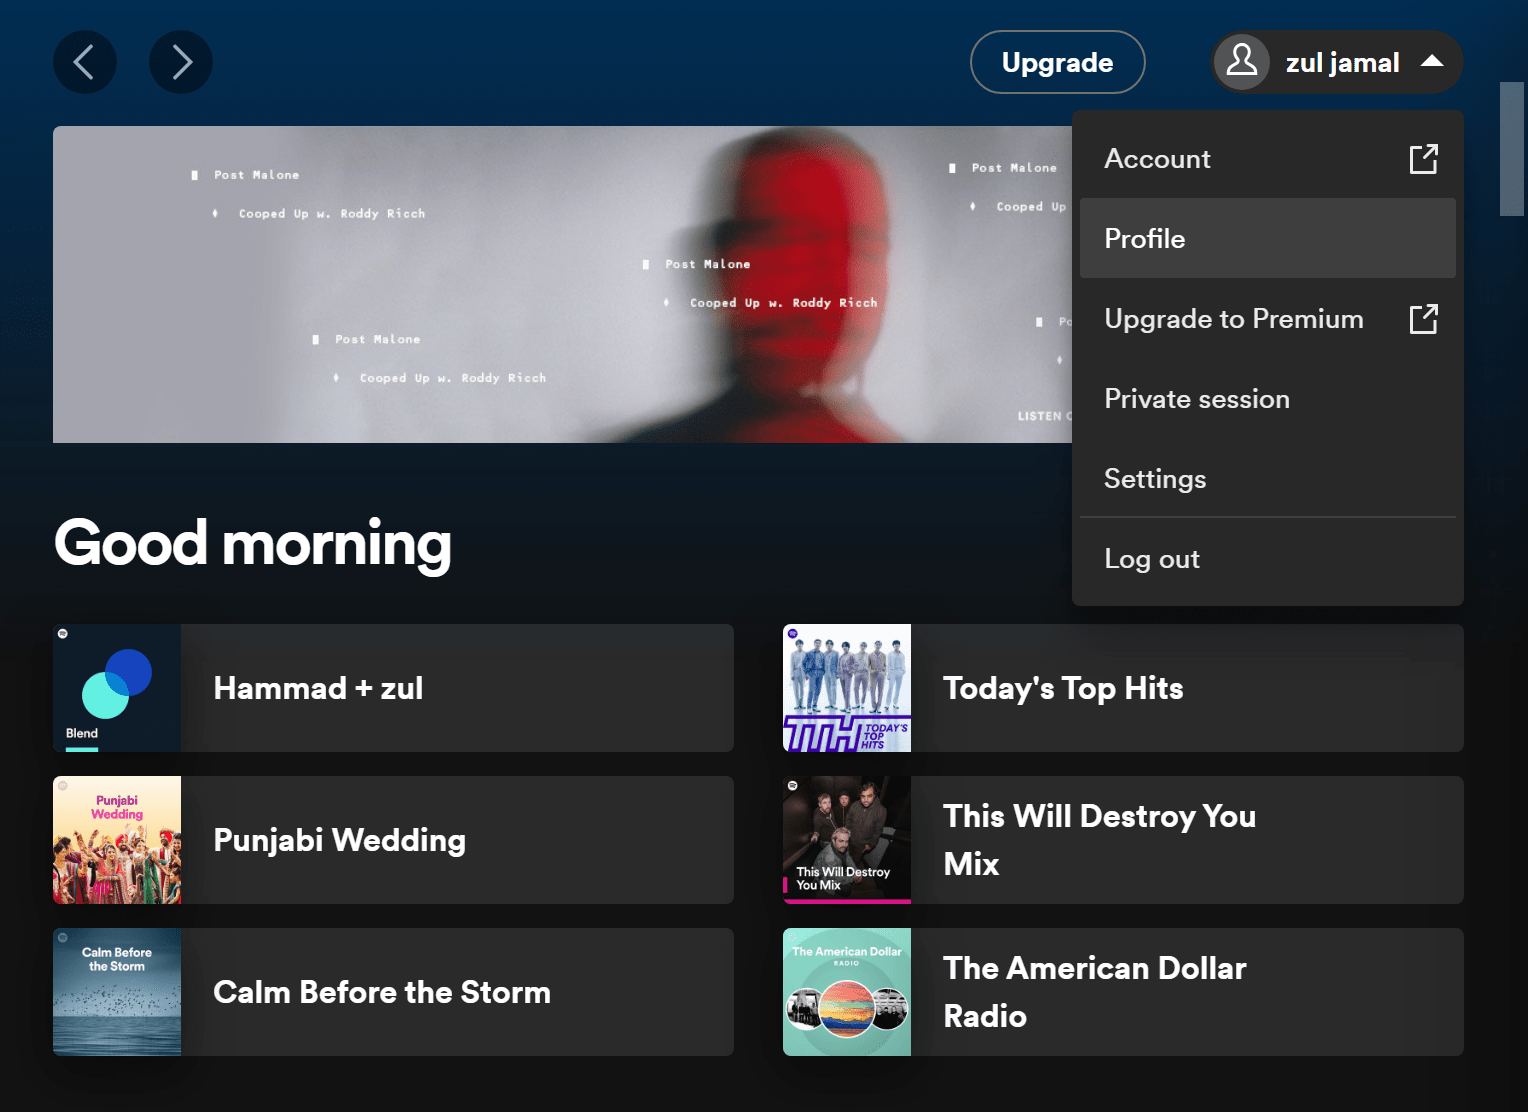 How To See Who Likes Your Playlist On Spotify In Easy Steps?